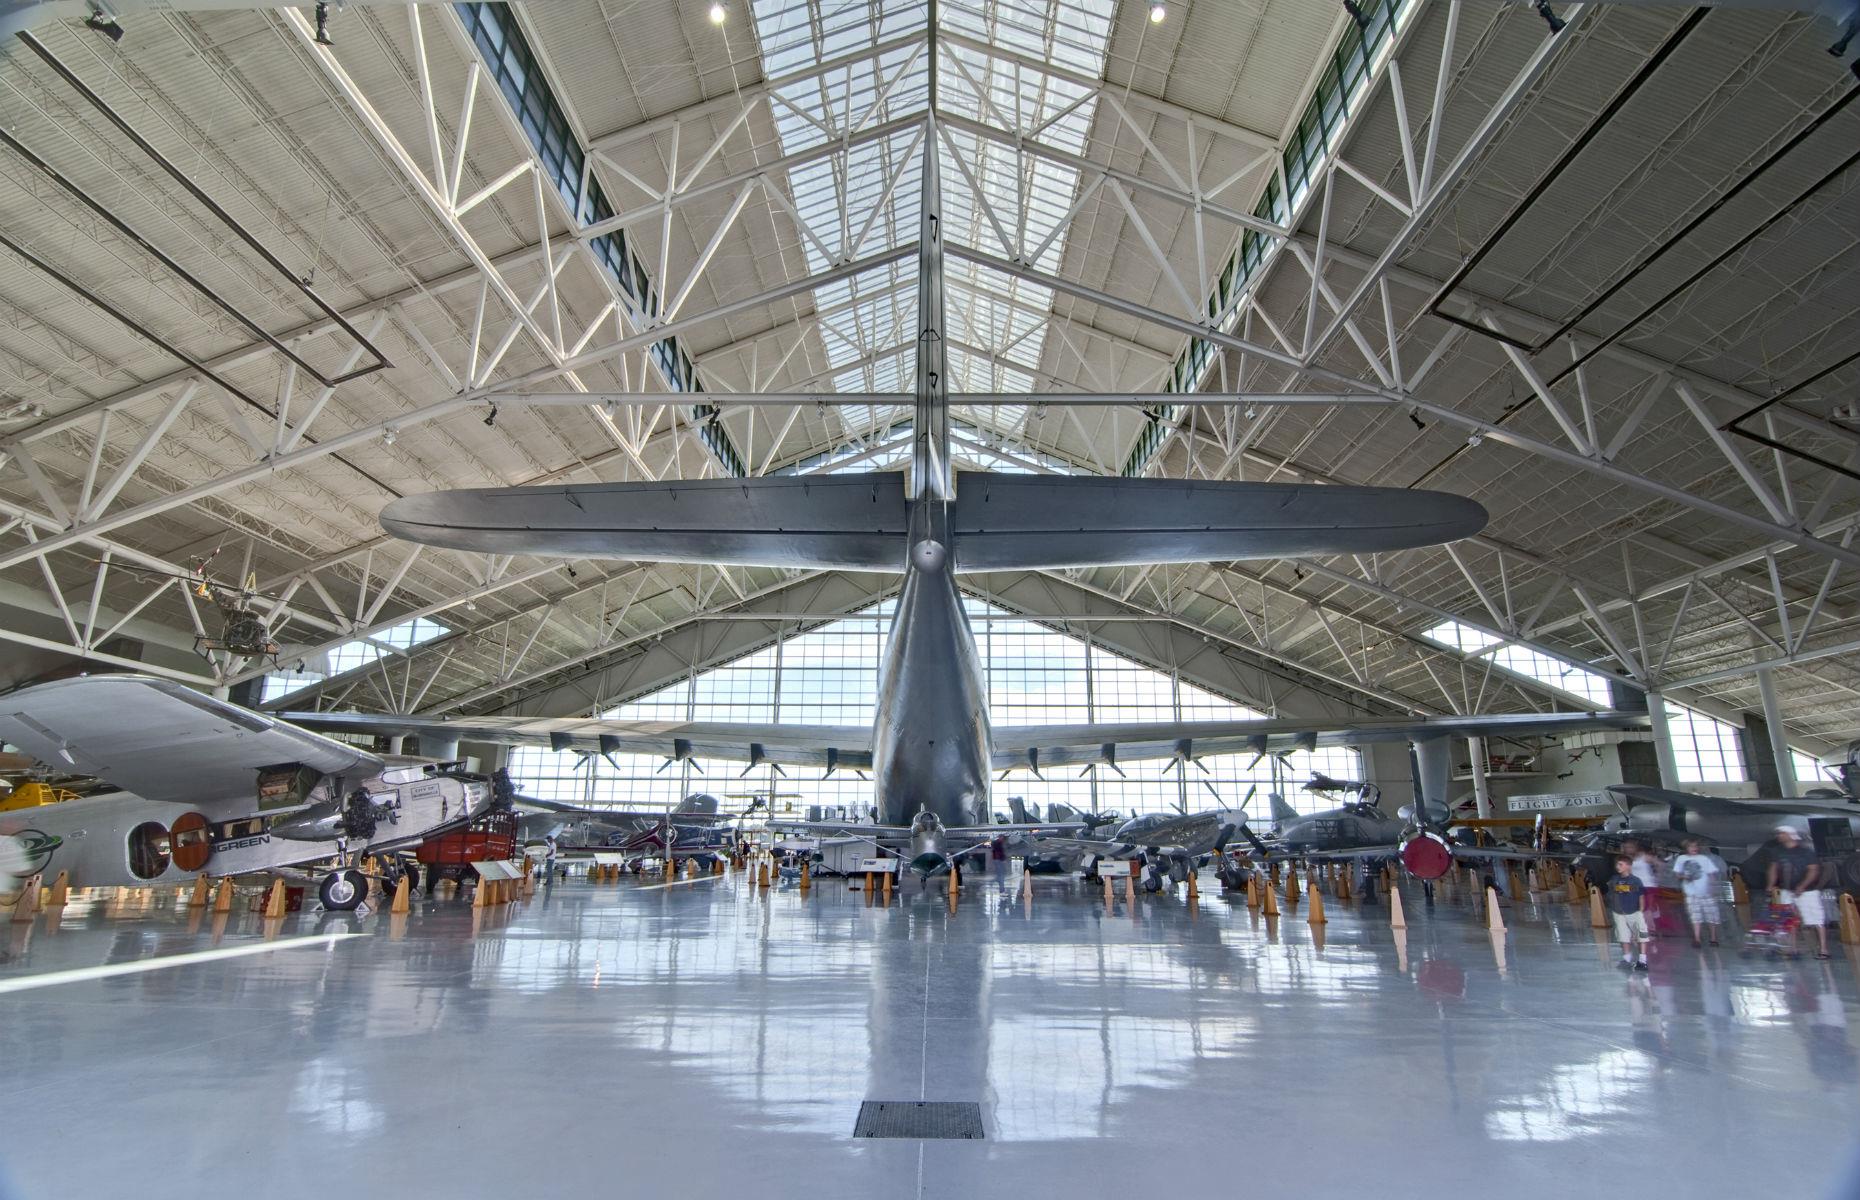 <p>It’s hard to believe that a plane built in the 1940s would still rank among the world’s largest, but famed aviator Howard Hughes’ colossal Hughes H-4 Hercules, nicknamed the Spruce Goose, is as impressive as ever. It has a 320-foot (98m) wingspan, and when it was built it was six times larger than any other aircraft at the time.</p>